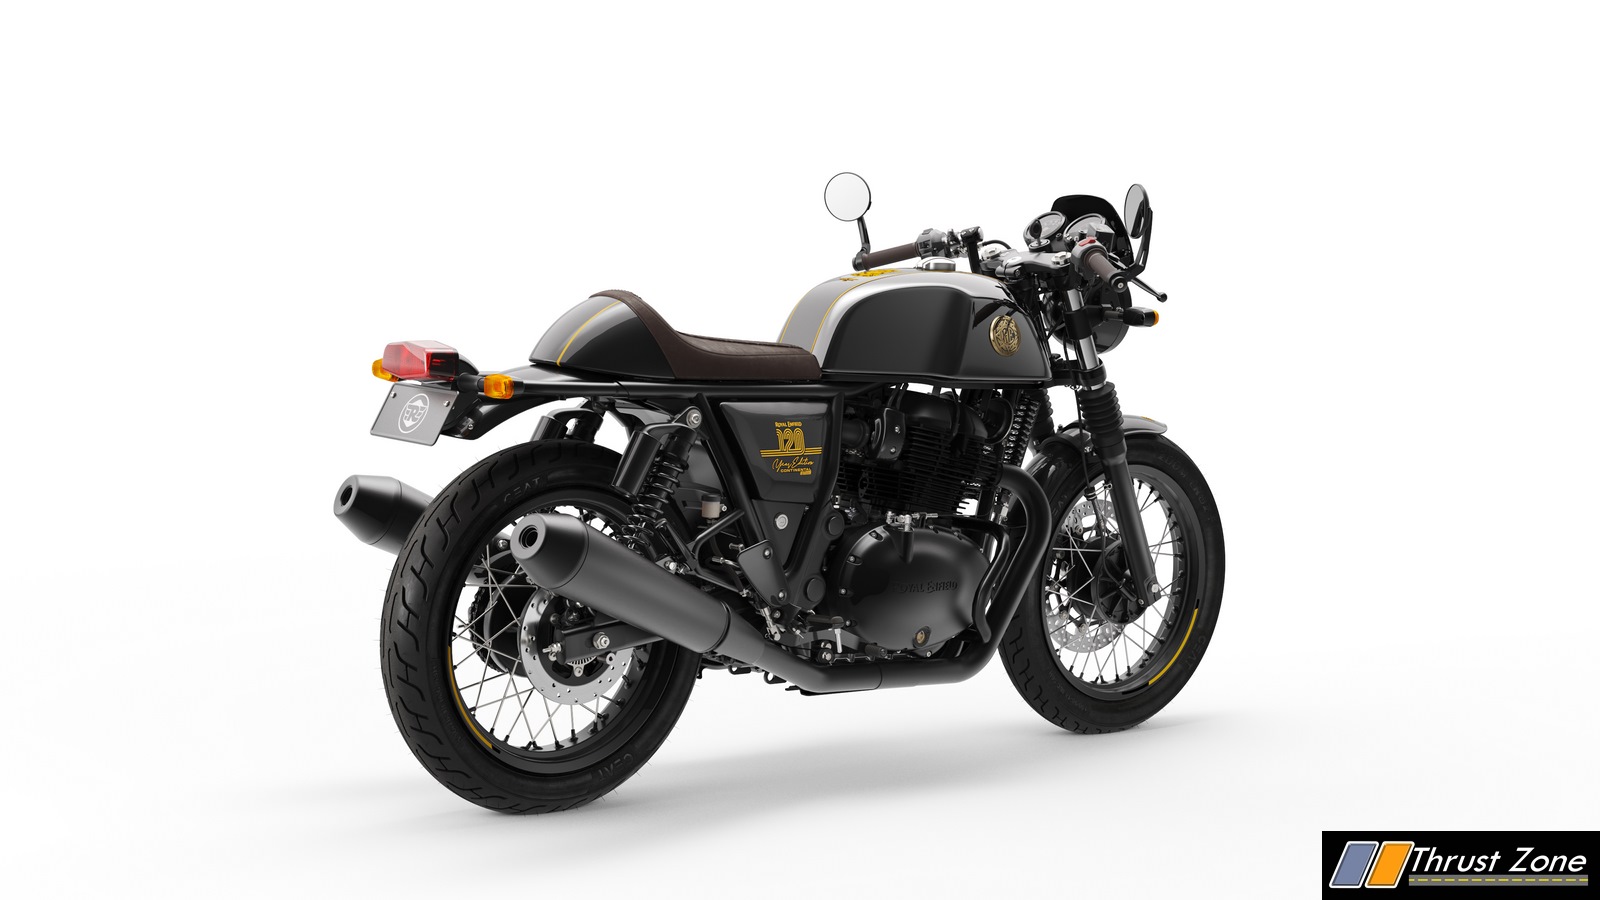 RE Interceptor INT 650 and the Continental GT 120th Year Anniversary Edition Launched